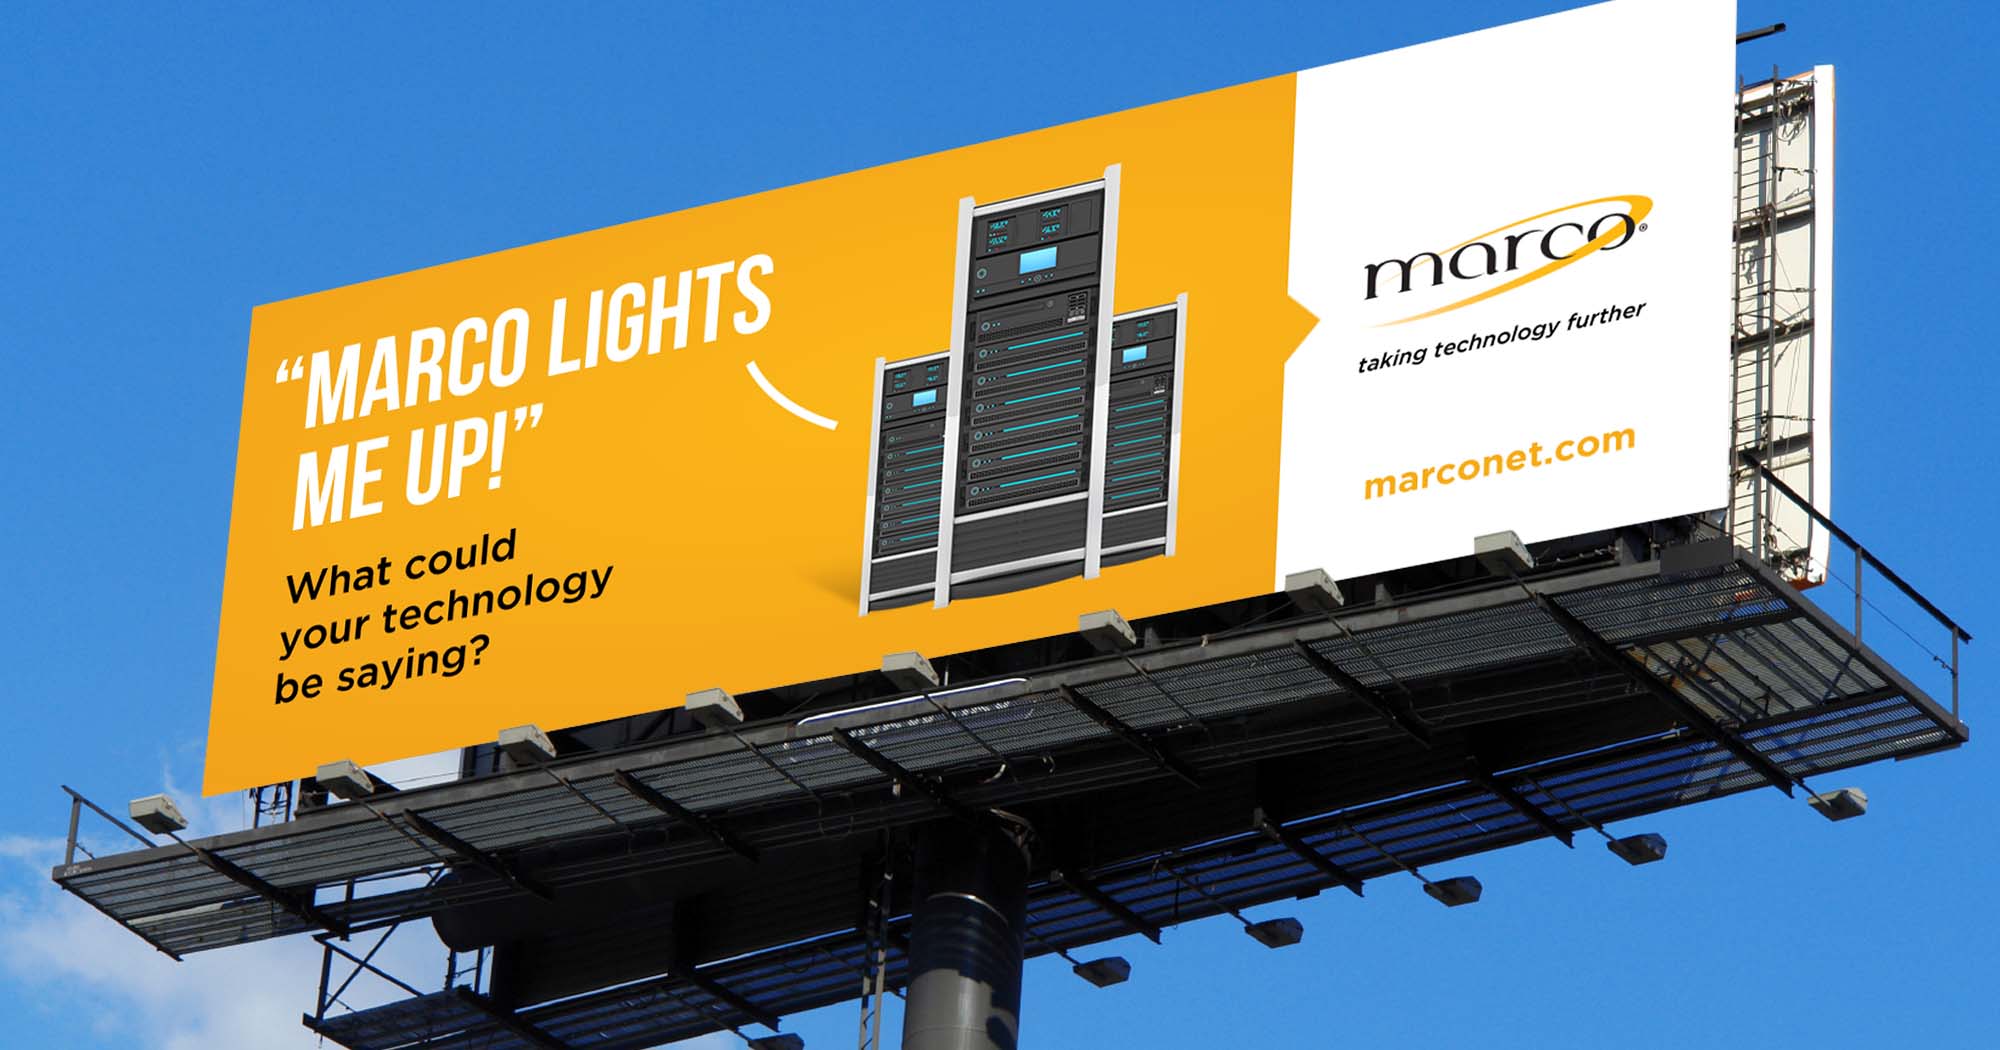 Gearbox-Marco-Campaign-Billboards-Technology